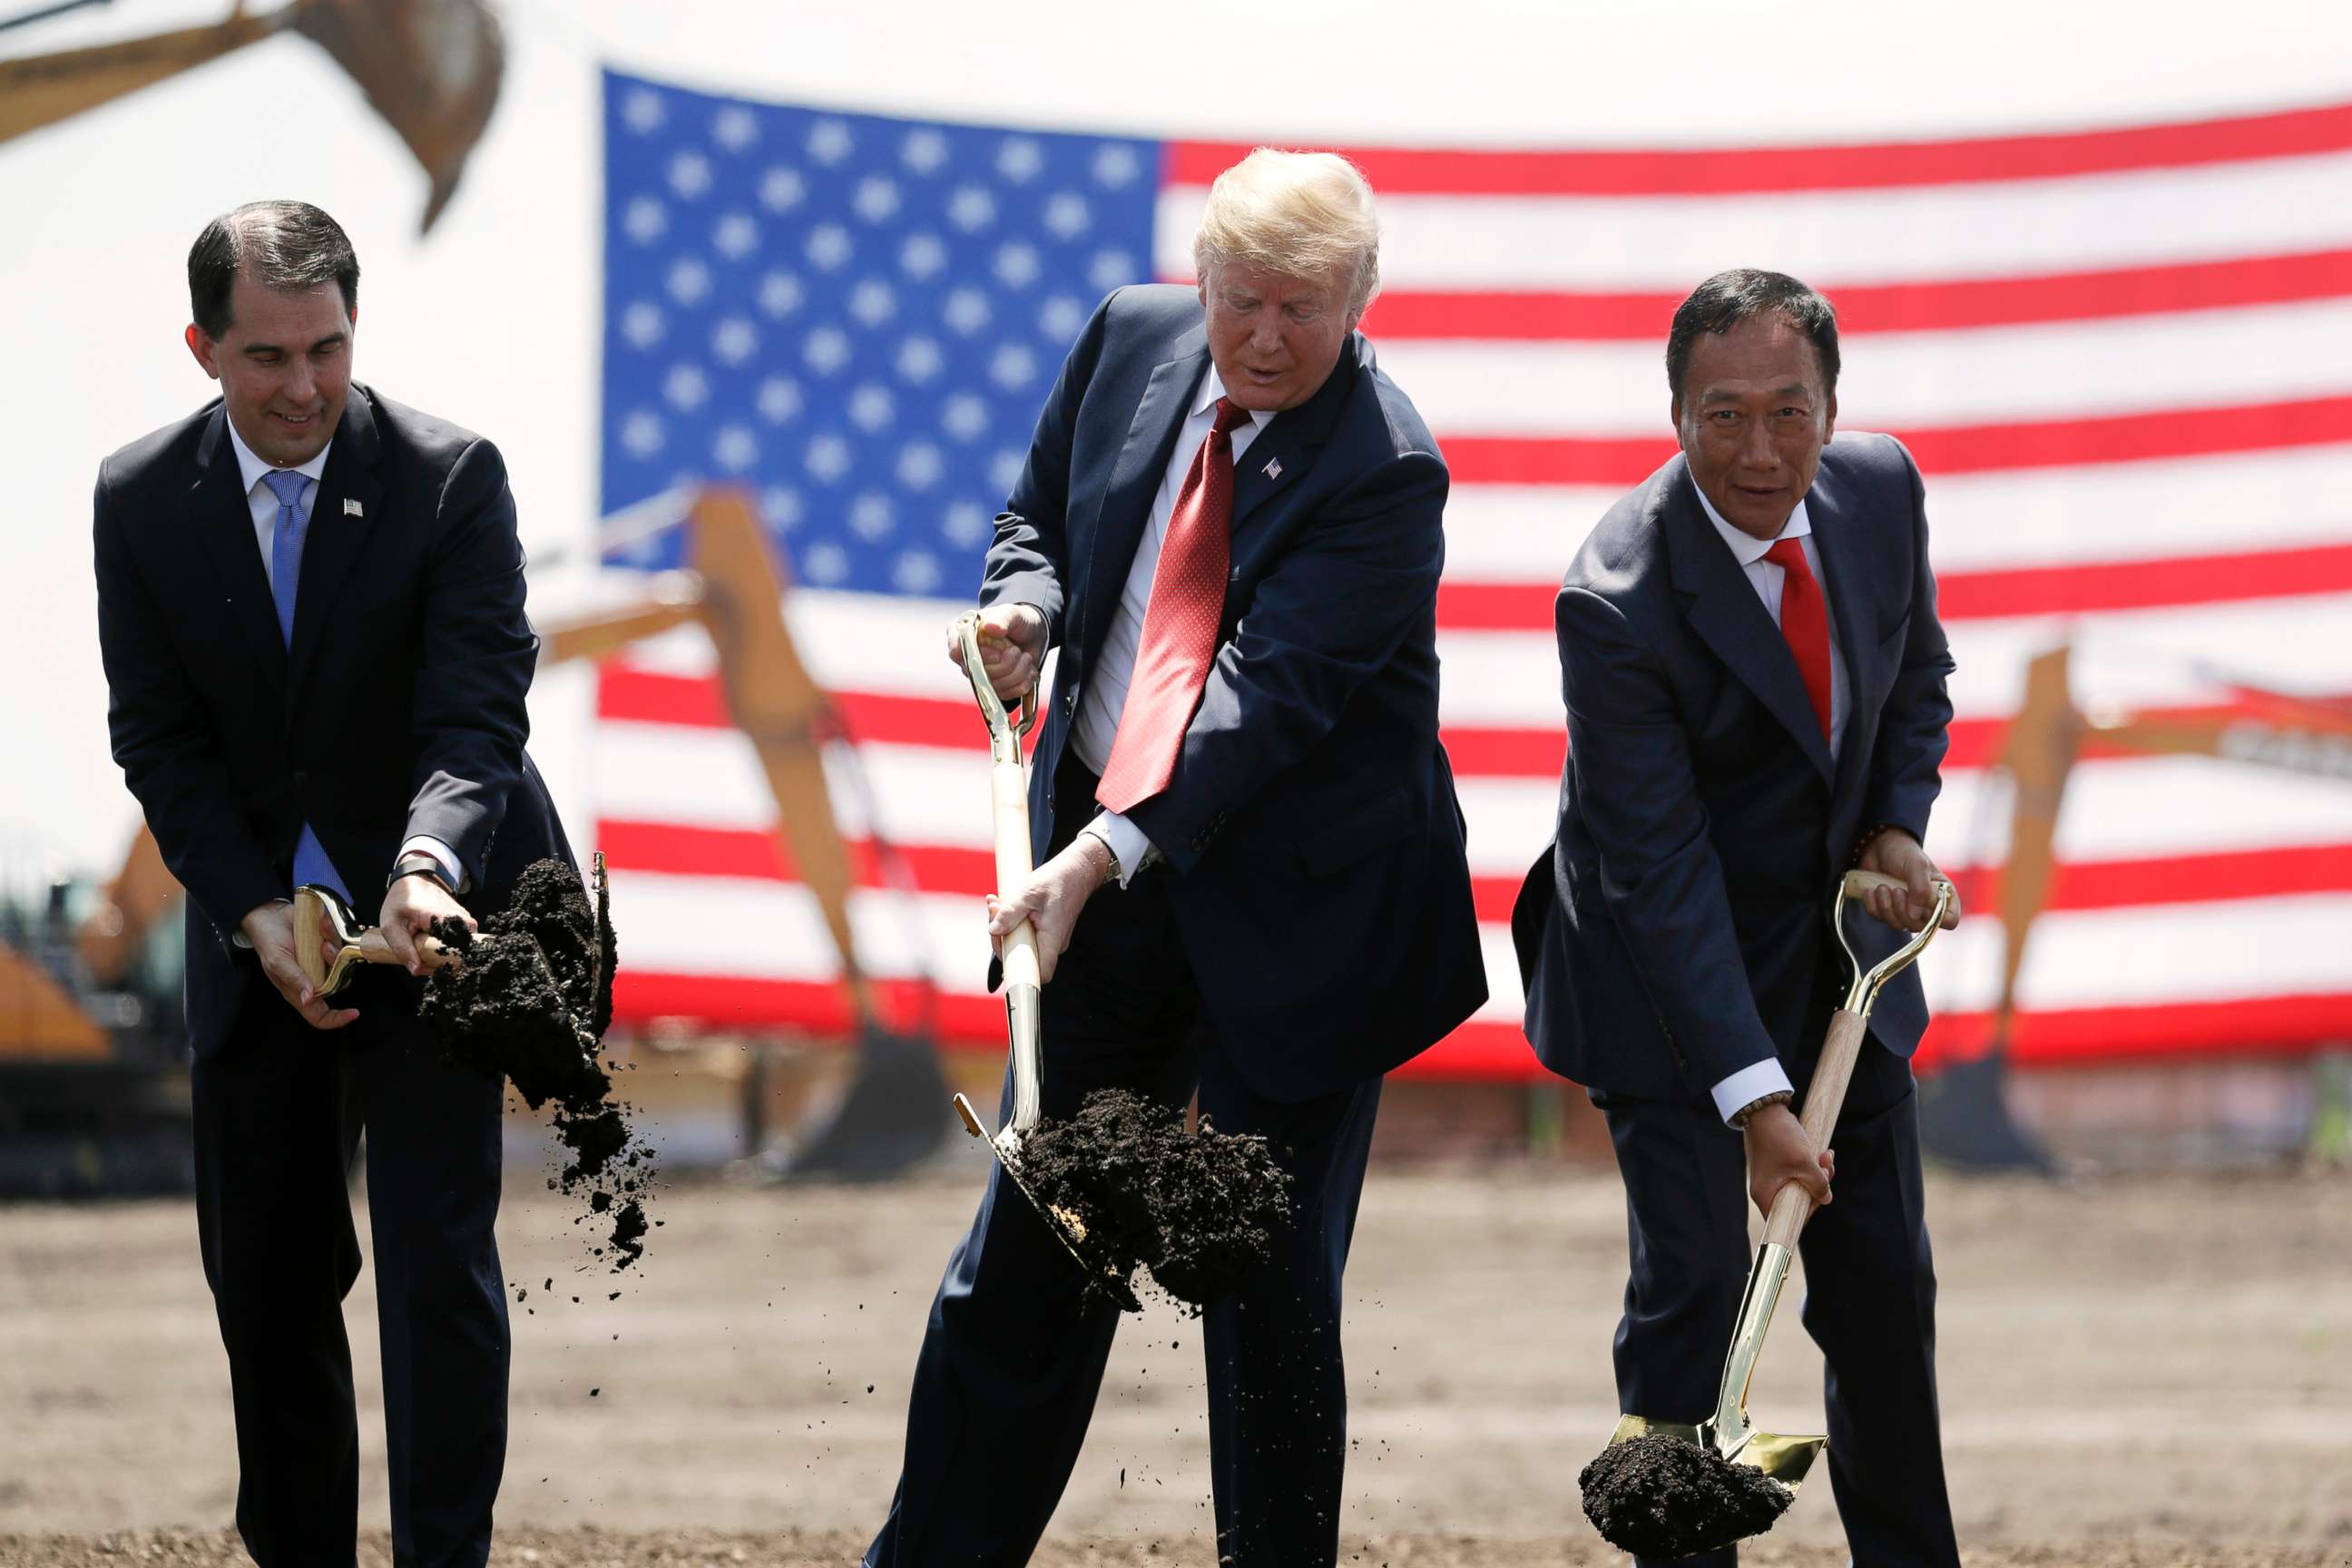 PHOTO: President Donald Trump, center, along with Wisconsin Gov. Scott Walker, left, and Foxconn Chairman Terry Gou participate in a groundbreaking event for the new Foxconn facility in Mt. Pleasant, Wis., June 28, 2018.